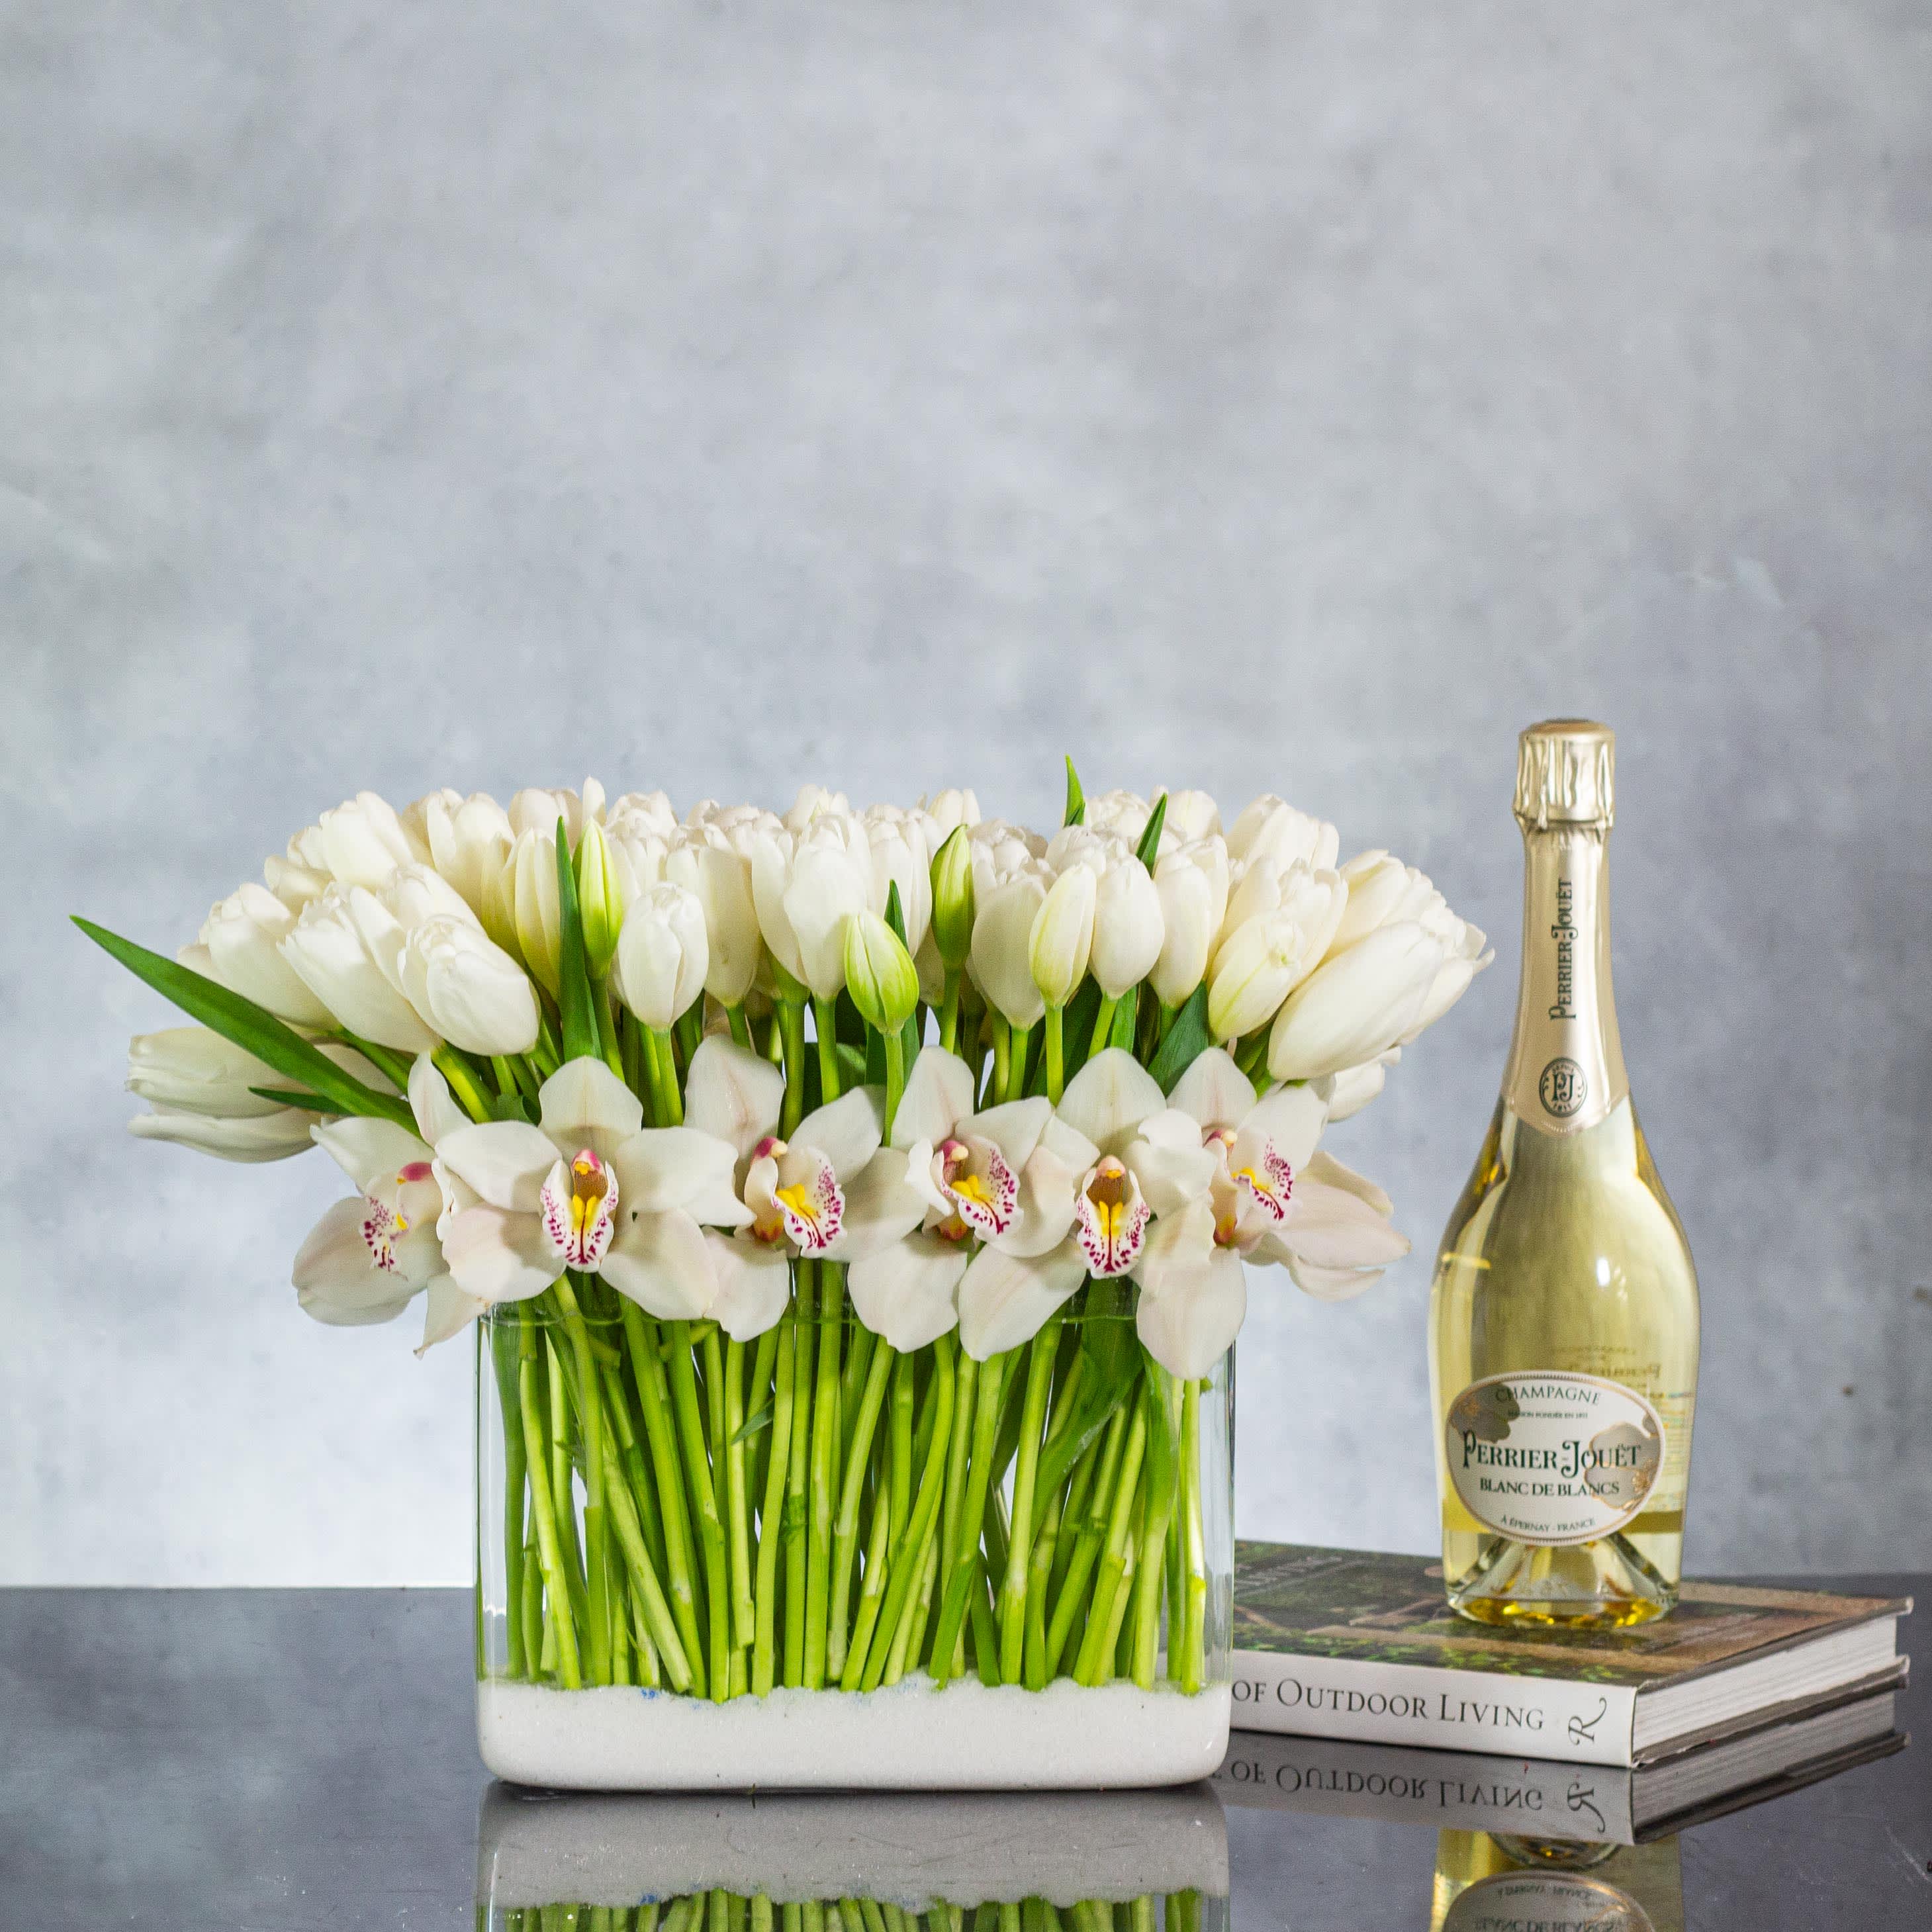 Bella  - Step into contemporary elegance with this modern floral arrangement featuring over 100 pristine white tulips and over a one Dozen delicate white orchids nestled in a sleek rectangular vase. The clean lines and minimalist design of this arrangement exude sophistication and charm, perfect for adding a touch of refinement to any space.  The purity of the white tulips combined with the ethereal beauty of the white orchids creates a serene and timeless display. Whether placed as a centerpiece or an accent piece, this modern arrangement offers a blend of elegance and simplicity that is sure to captivate admirers and evoke a sense of tranquility.